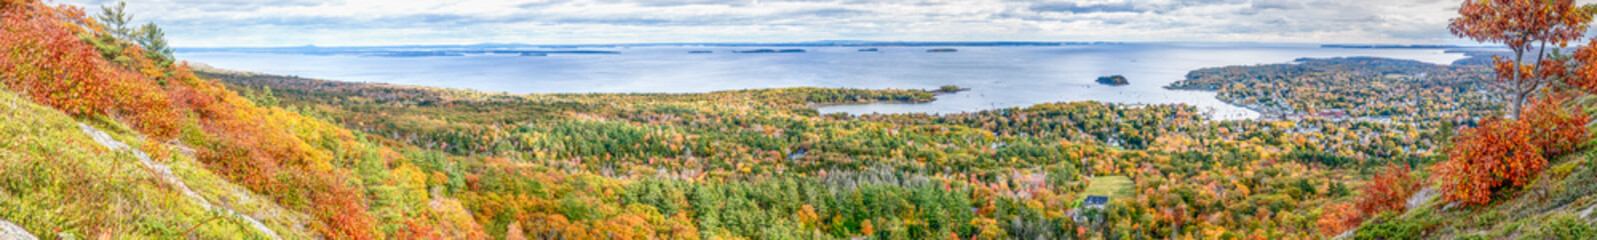 Autumn foliage covers the landscape around Penobscot Bay and the village of Camden, Maine as seen from atop Mount Battie in Camden Hills State Park in this wide photographic panorama. - 466024704